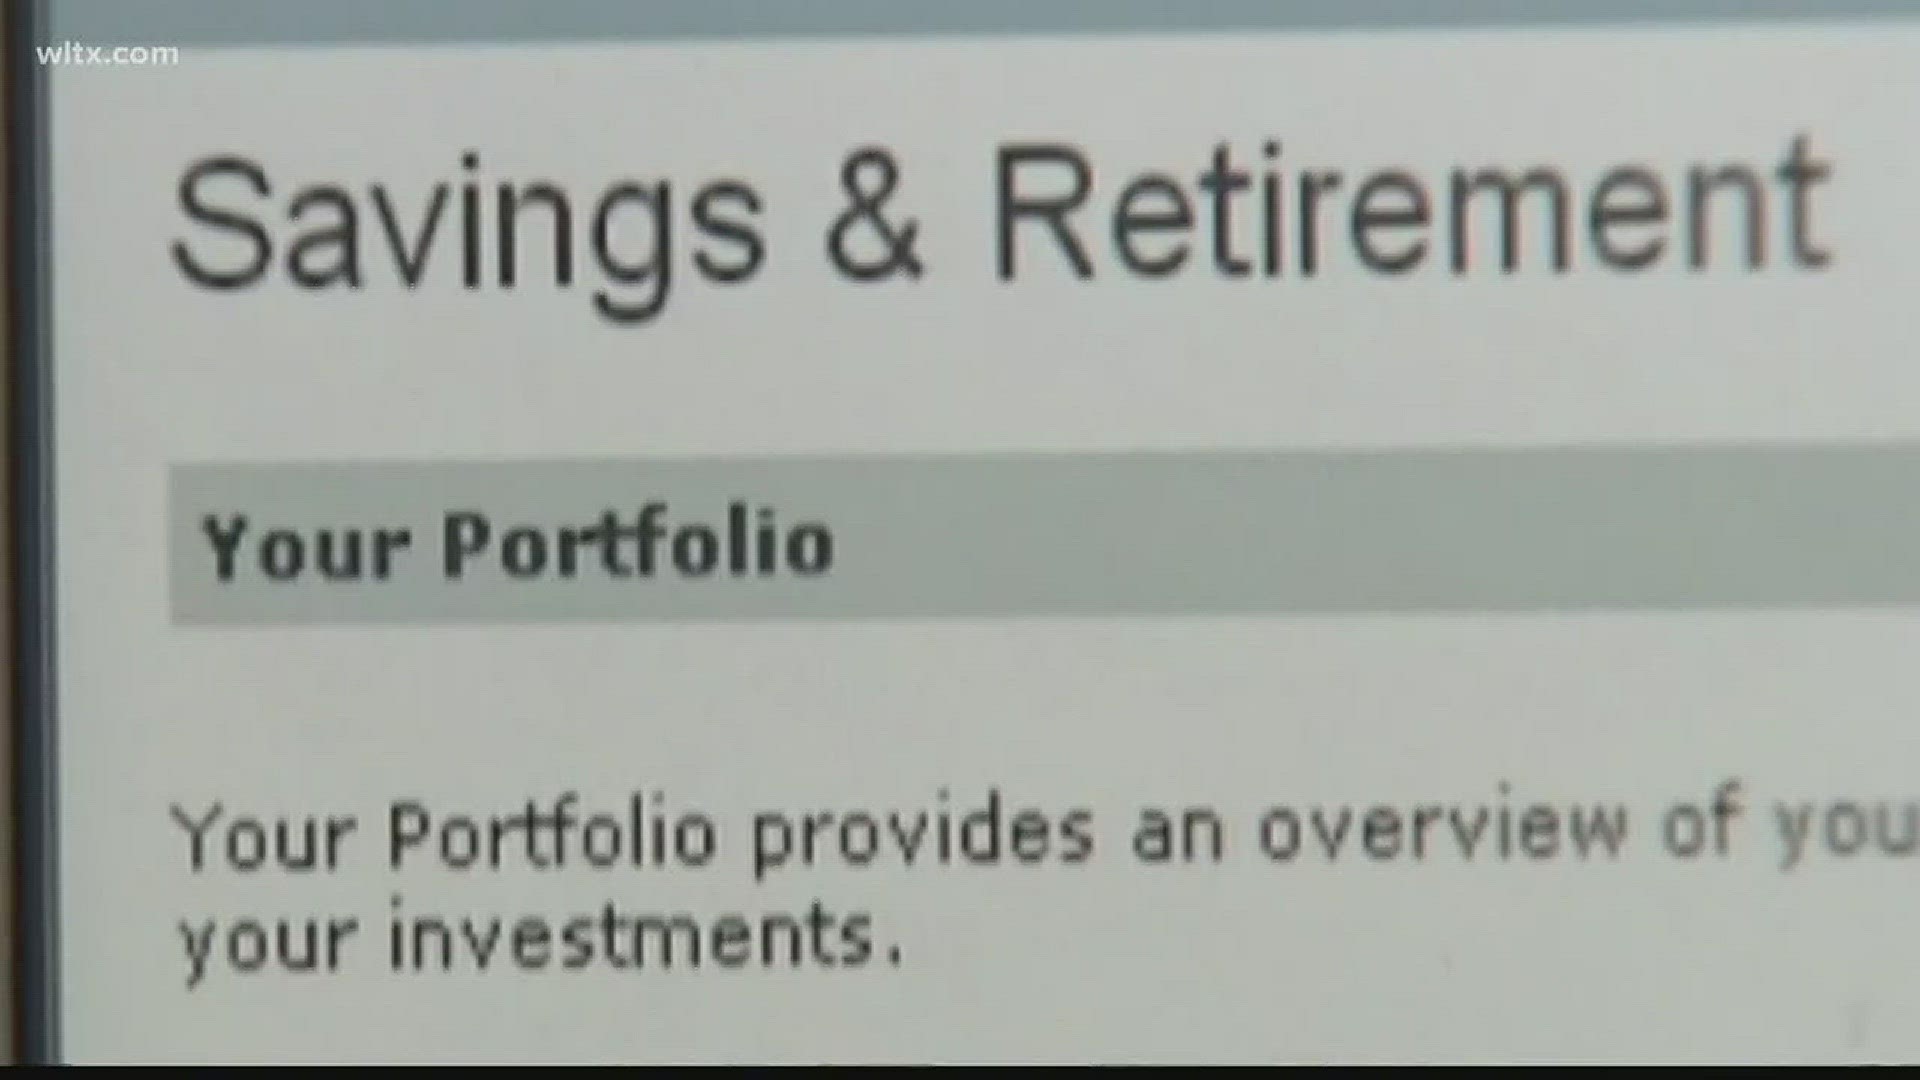 Is it ever too early to look at retirement options?  Steven Hughes, from Know Money Inc., lets us know - and what we should be looking for - on this Money Monday!